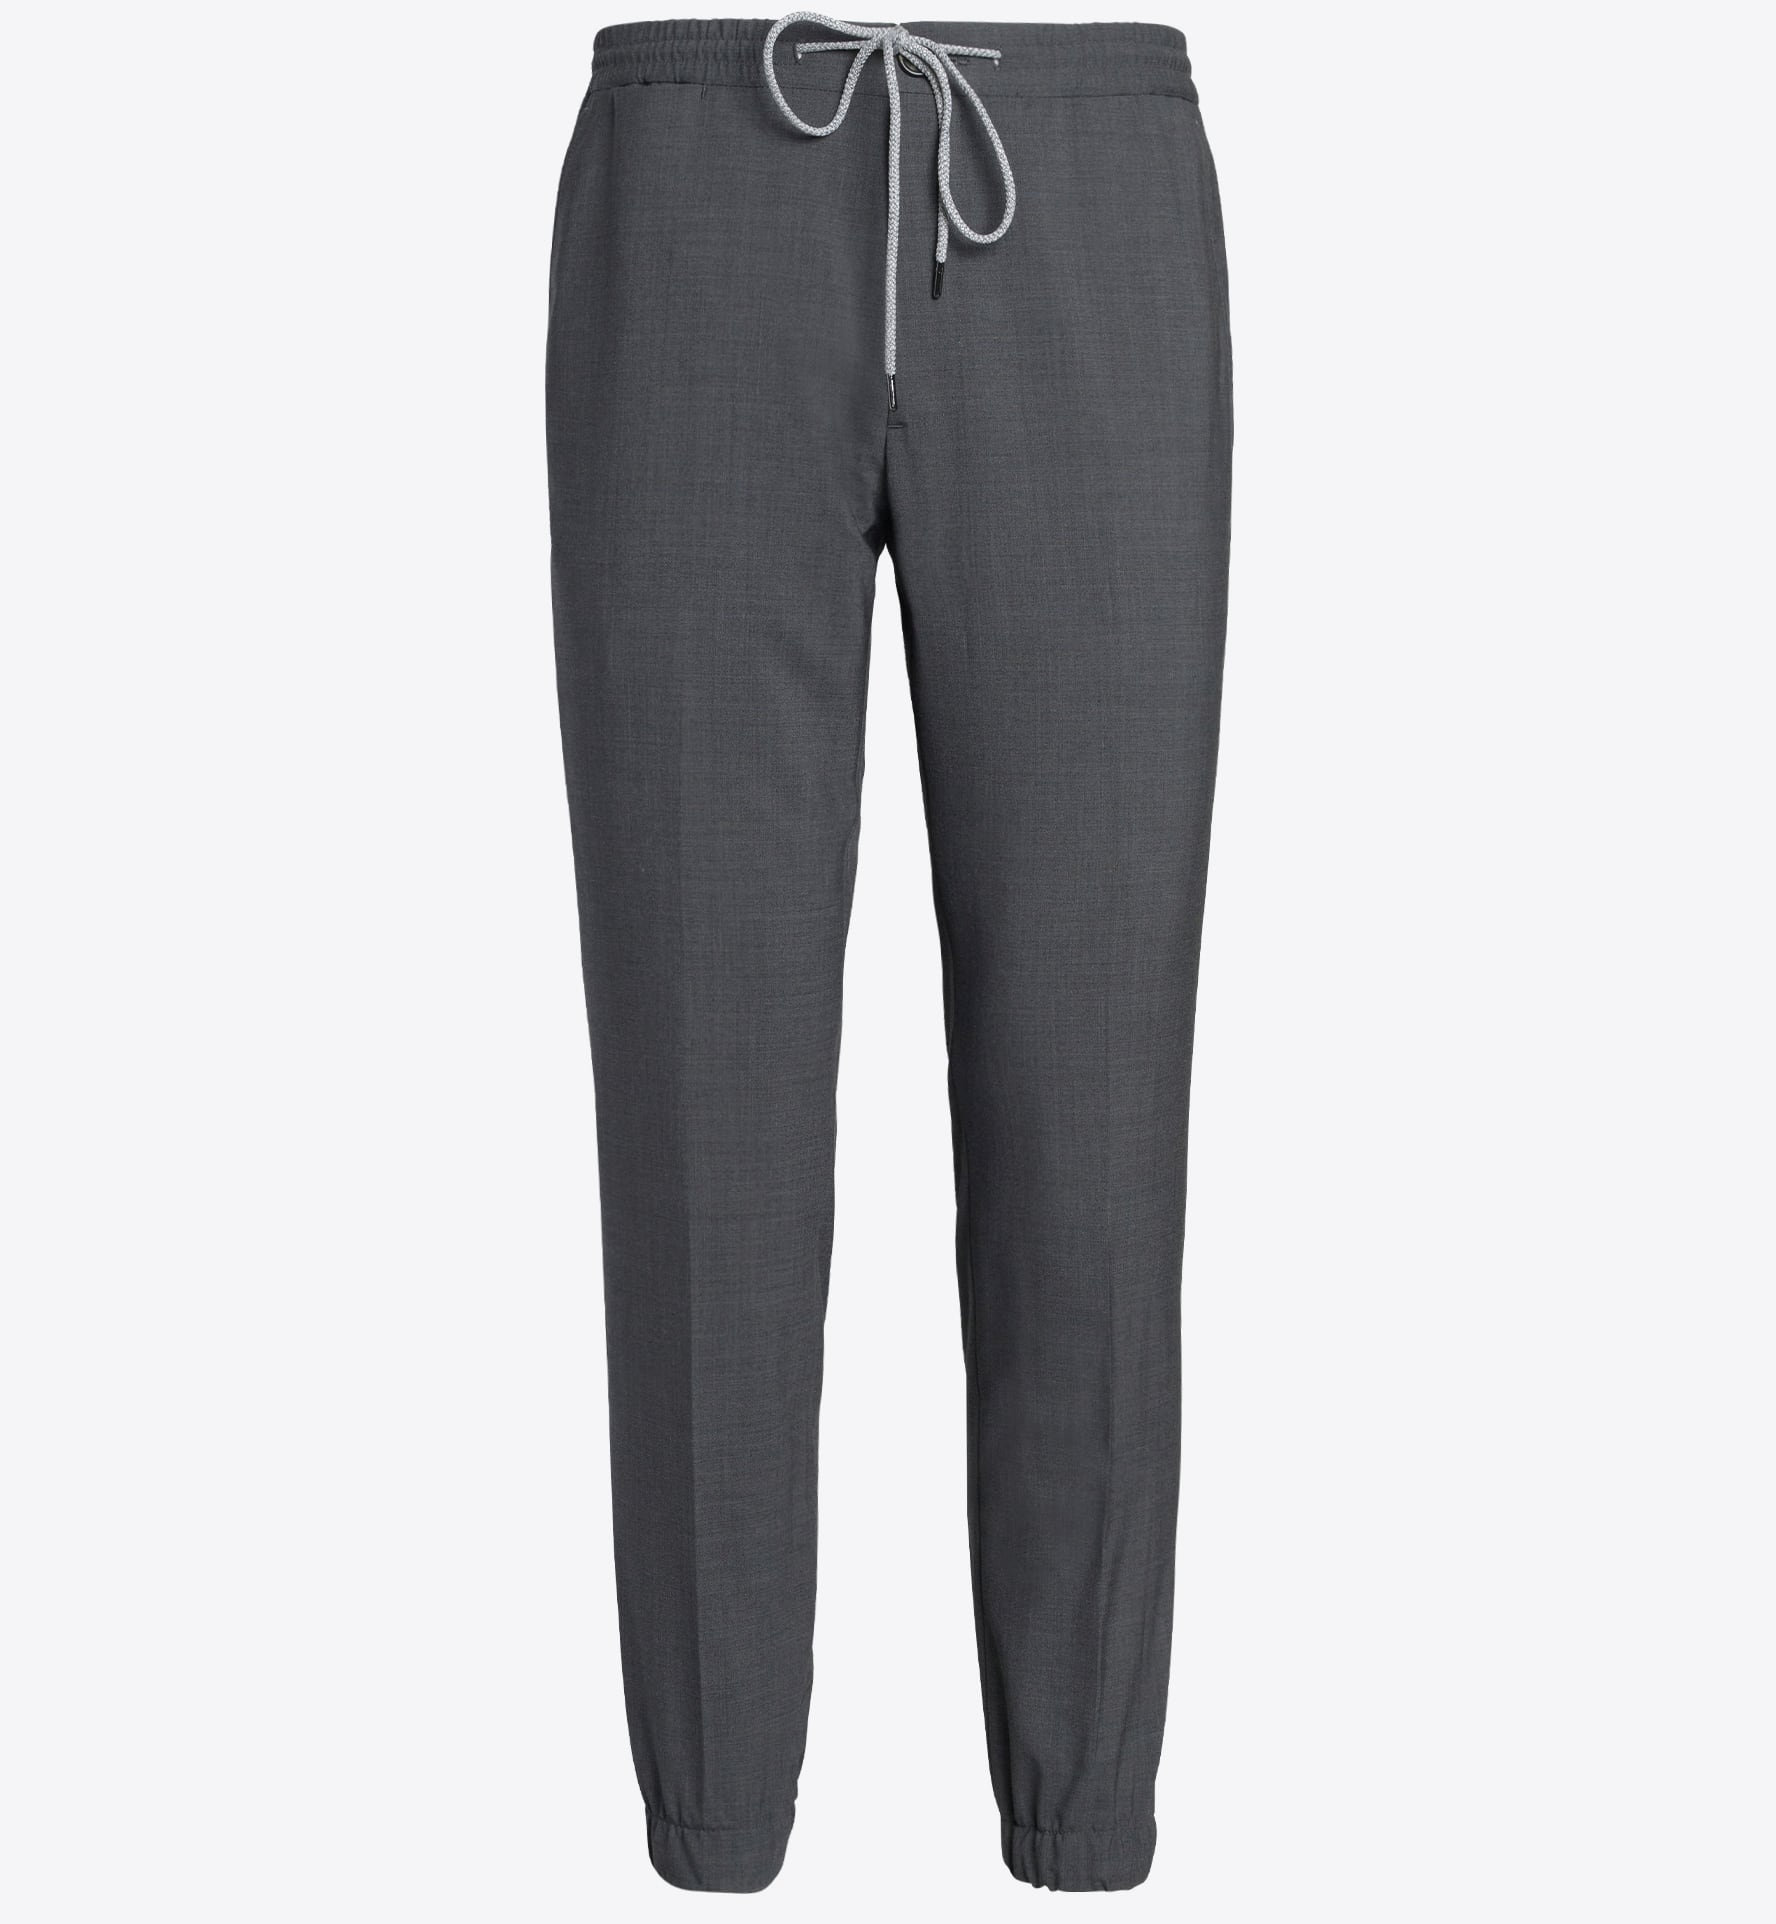 Zoom Image of Waverly Grey Stretch Wool Jogger